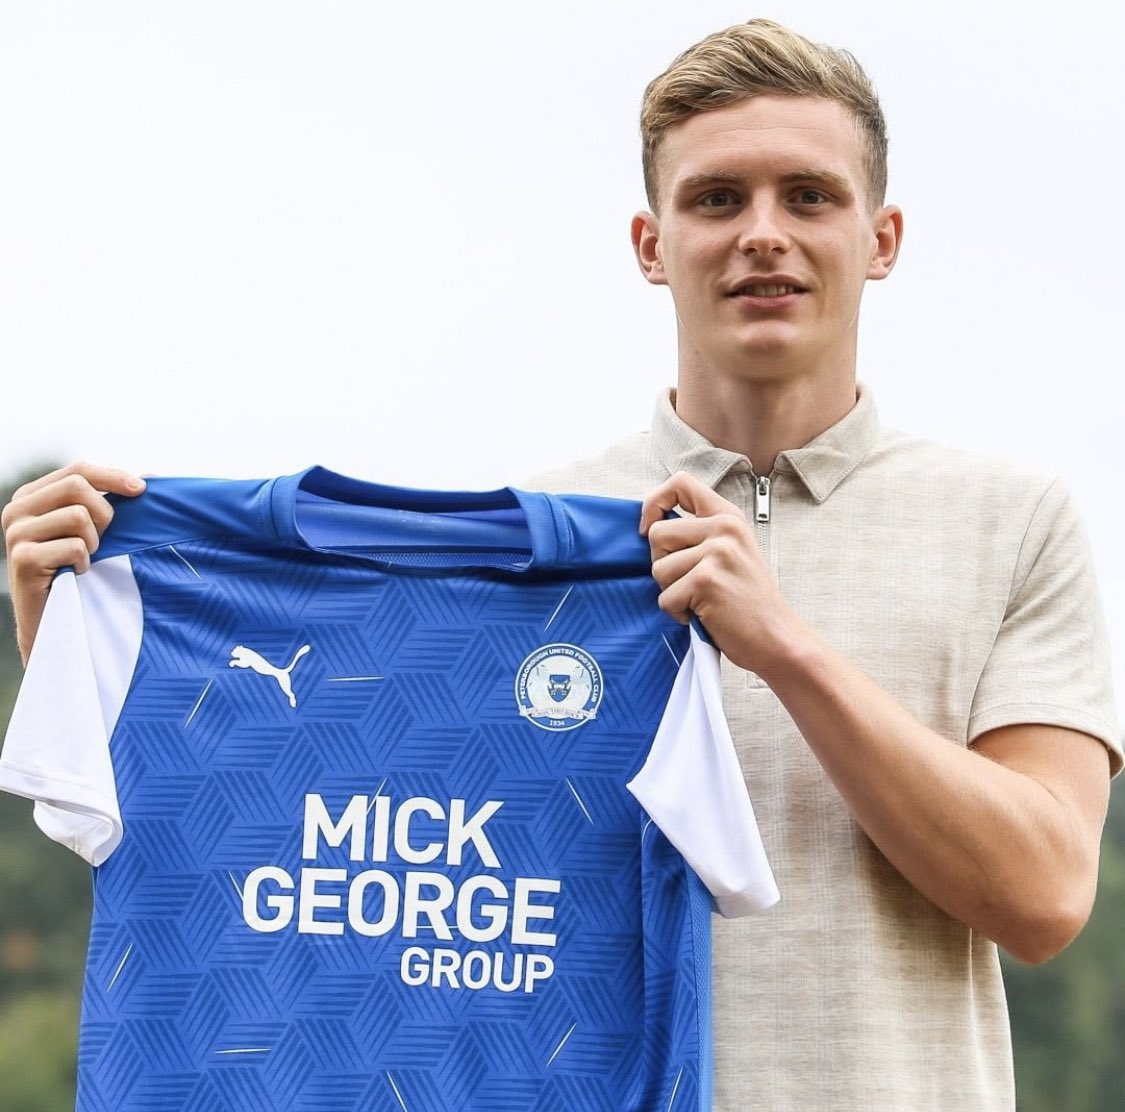 Delighted to have signed for @theposhofficial excited to have joined such a great club. 🔵⚪️ Also a massive thank you to the people @ManUtd who have helped develop and support me over the years.